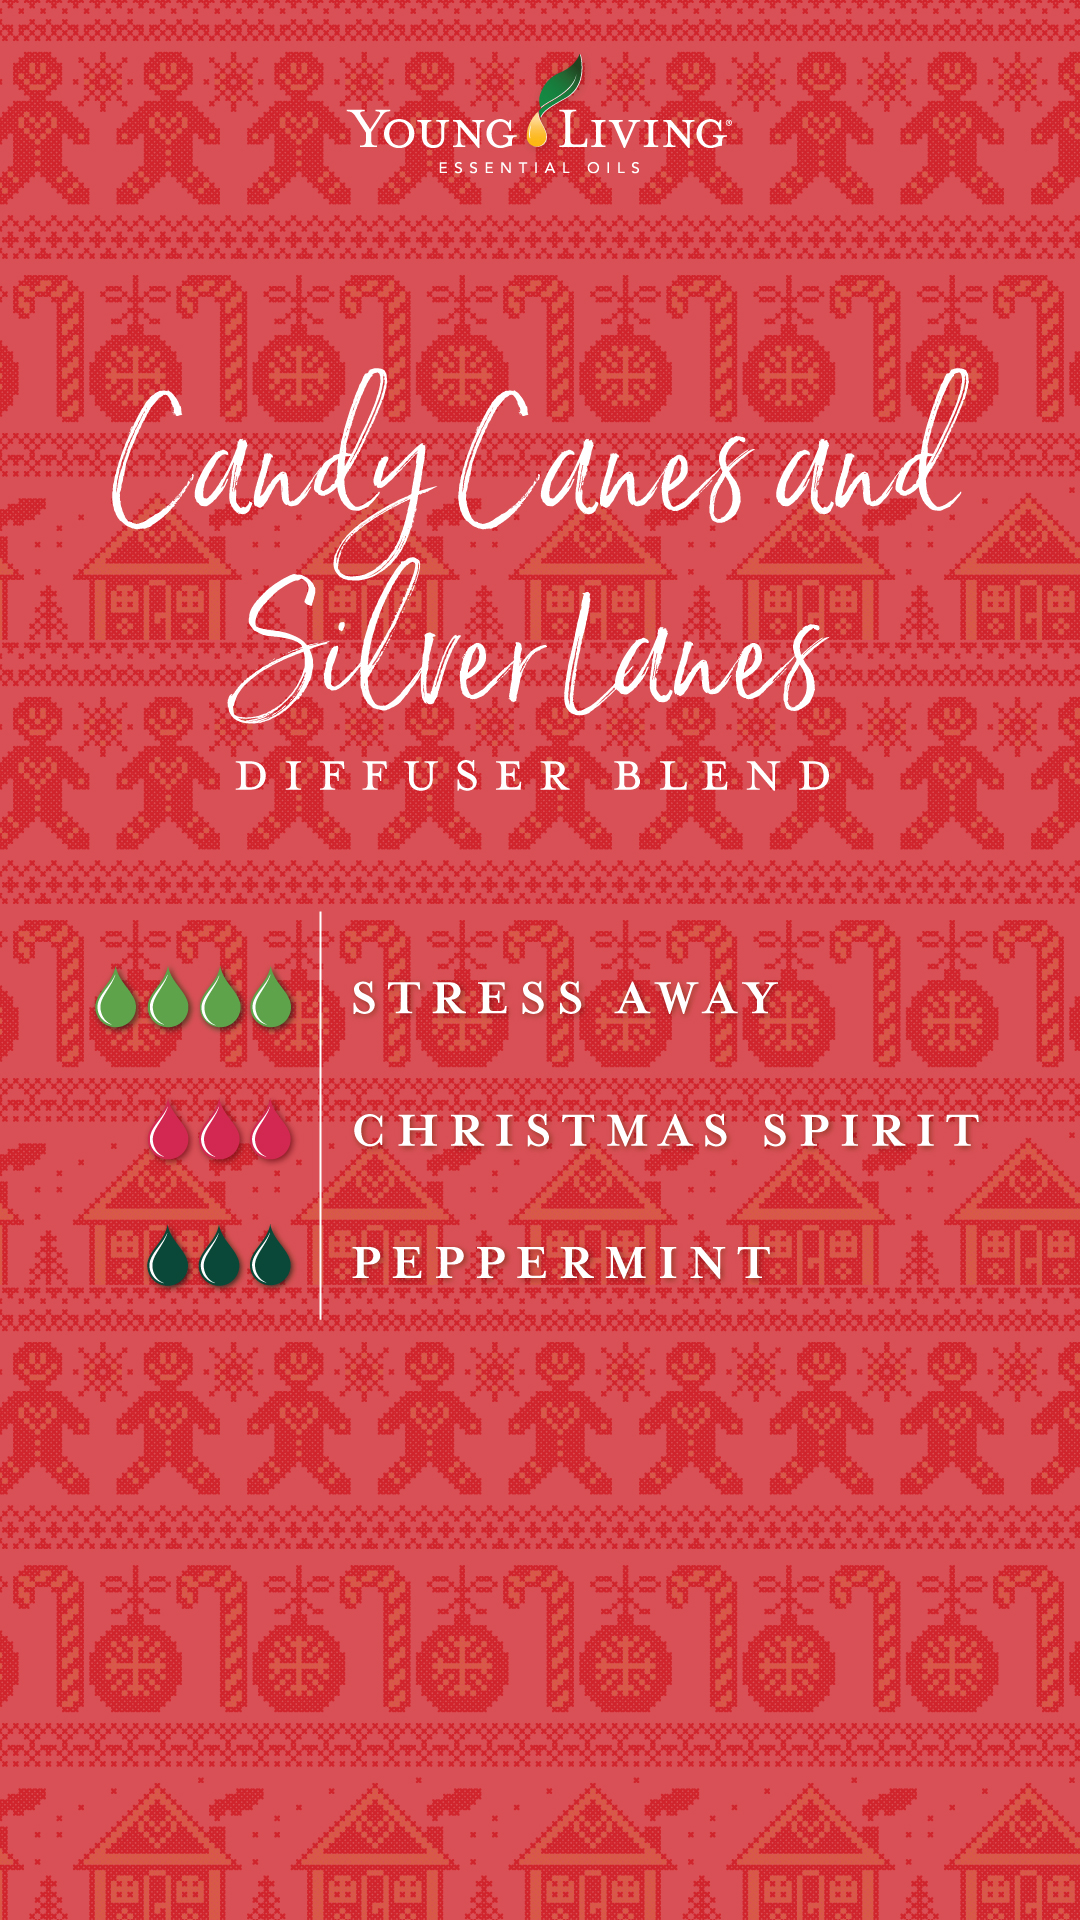 Candy Canes and Silver Lanes diffuser blend